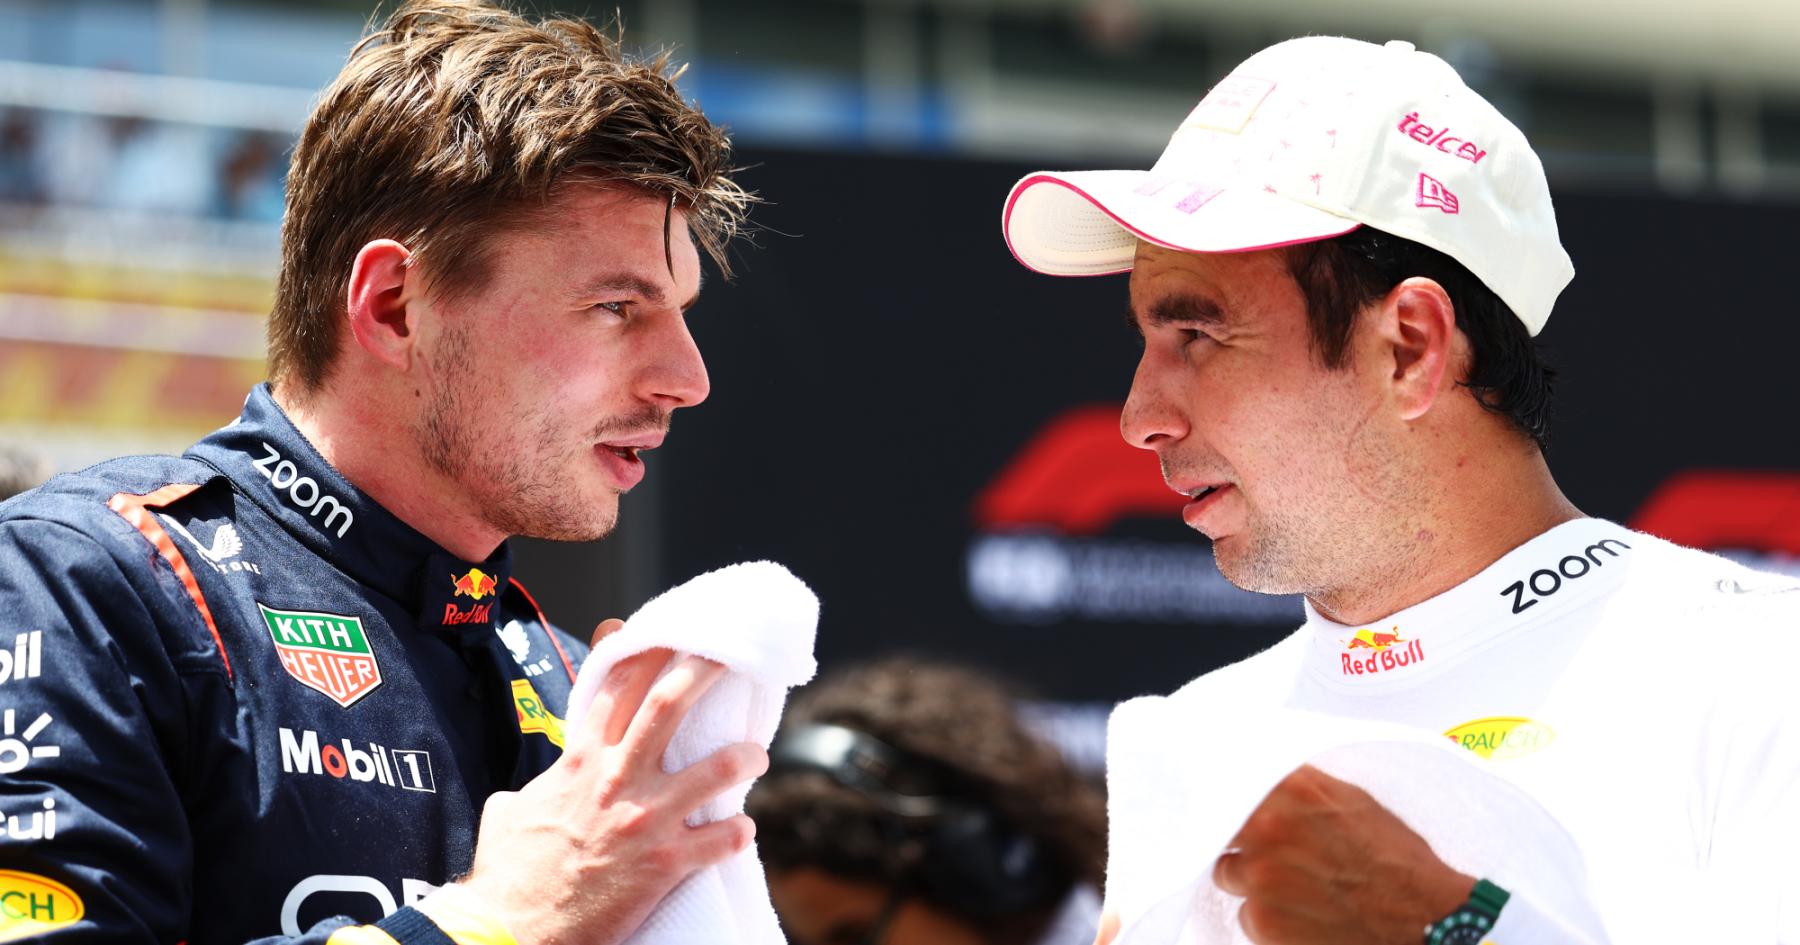 Flashes of Brilliance: Perez Shows Potential to Challenge Verstappen in Miami